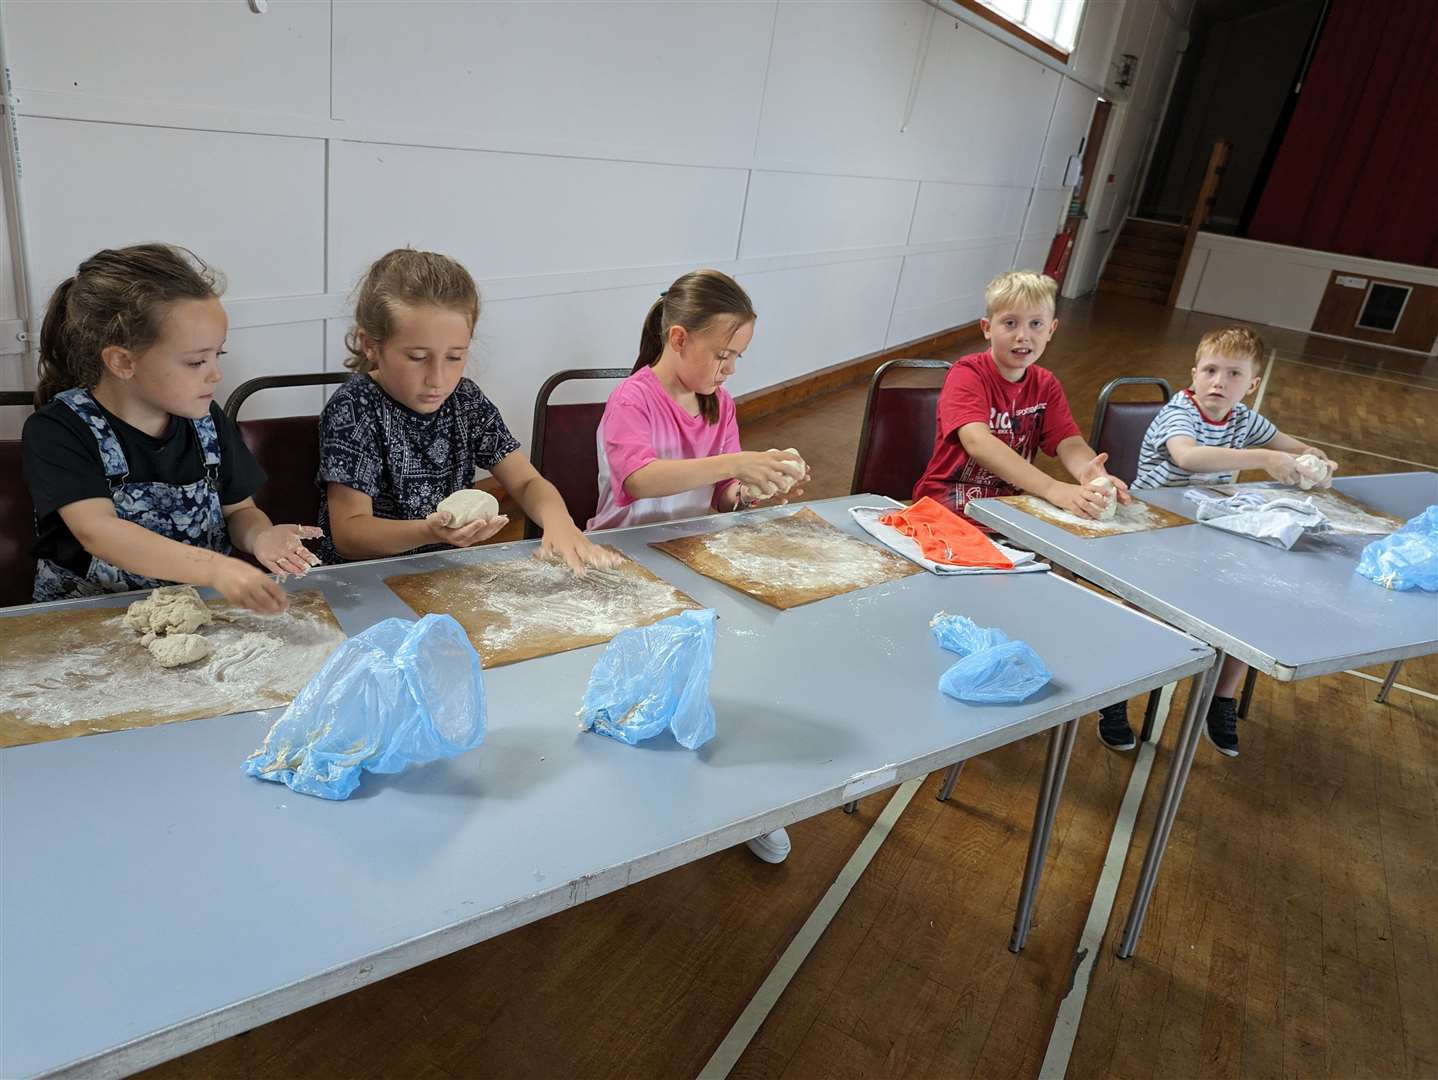 Youngsters enjoyed making pizza pinwheels and sticky popcorn squares at the kids' cookery session. From left: Violet Stevenson, Ella MacLean, Ruby Stevenson, Jack and Fraser Livings.